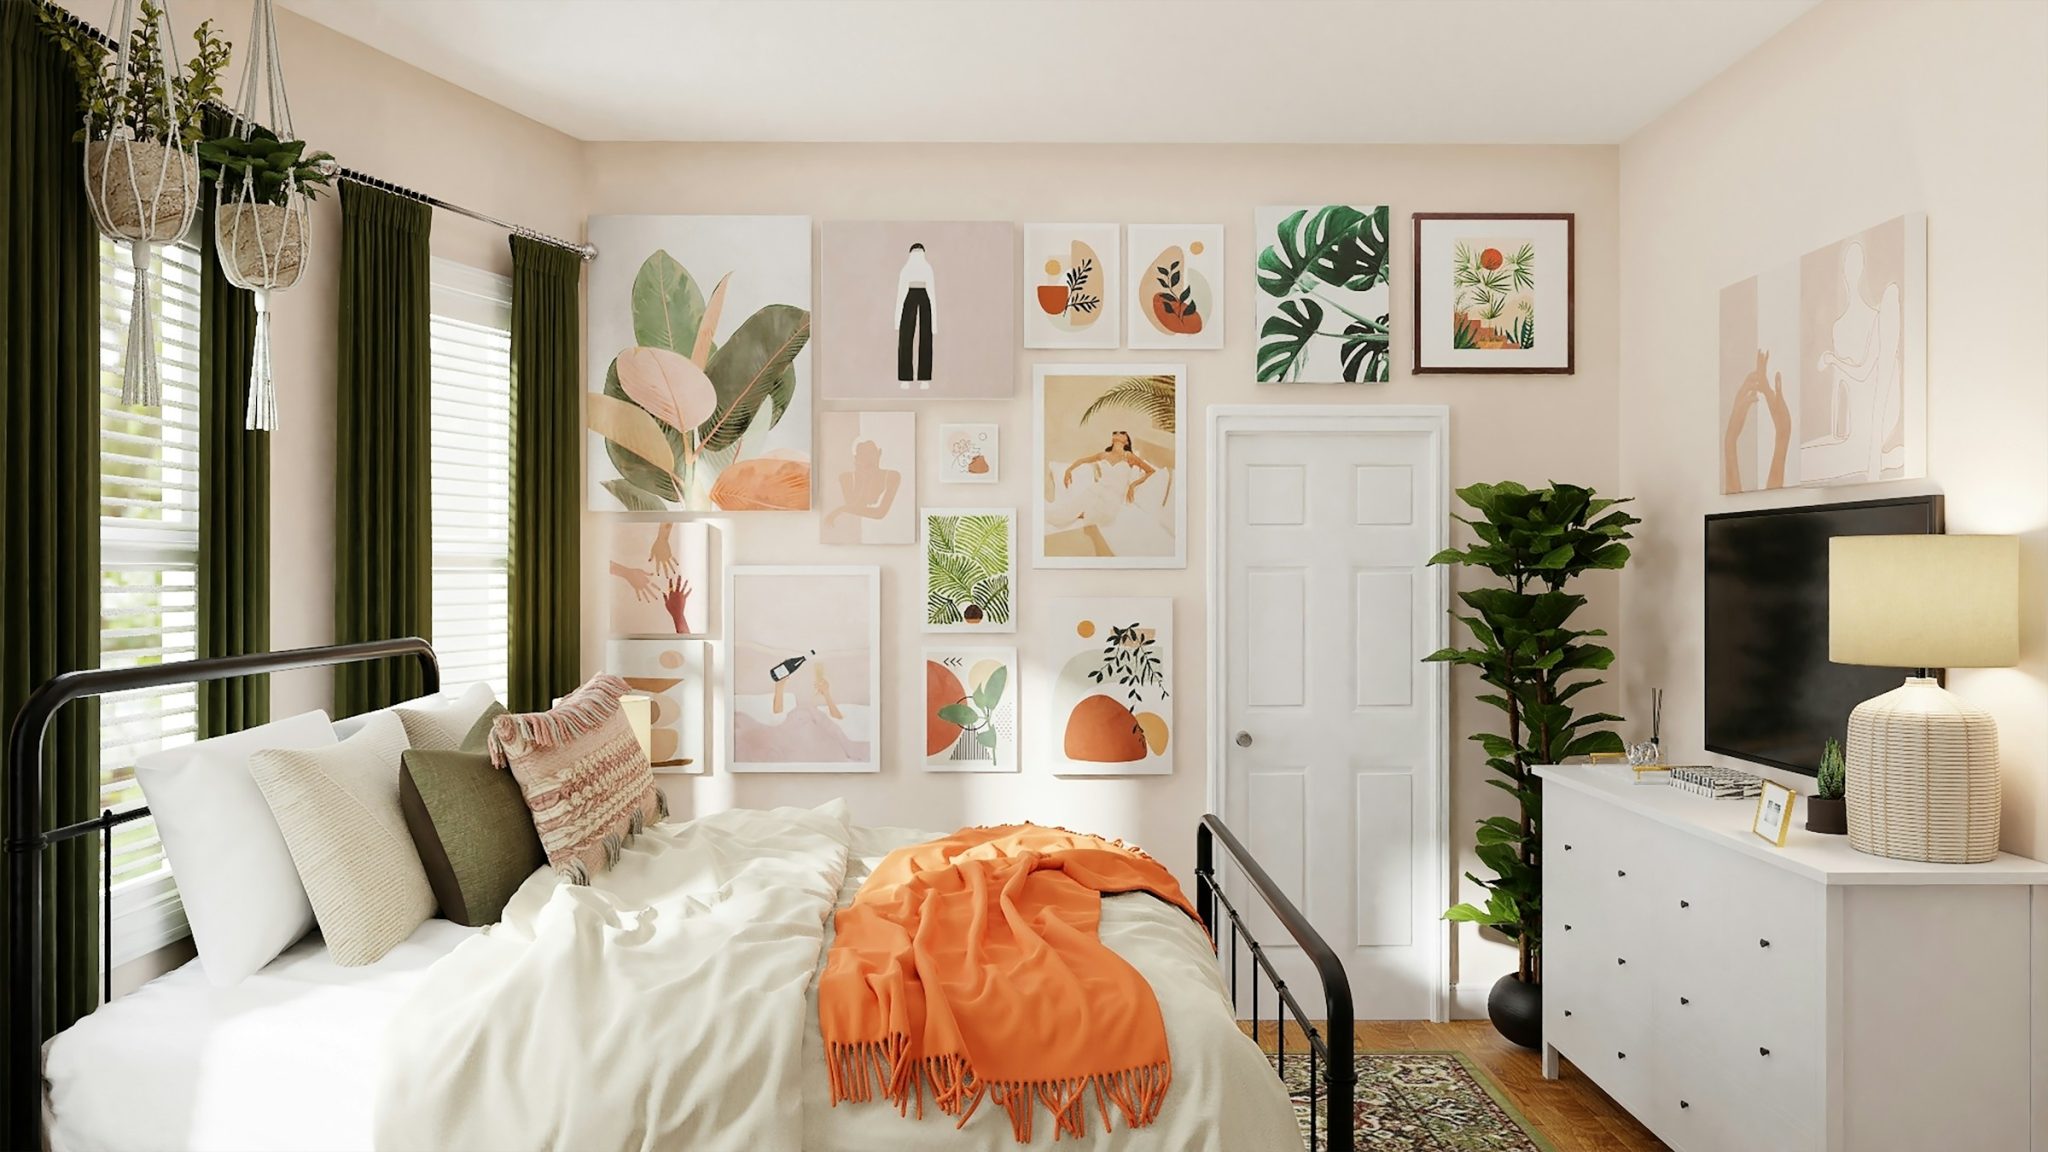 How to maximize space in your bedroom and turn it from blah to bliss